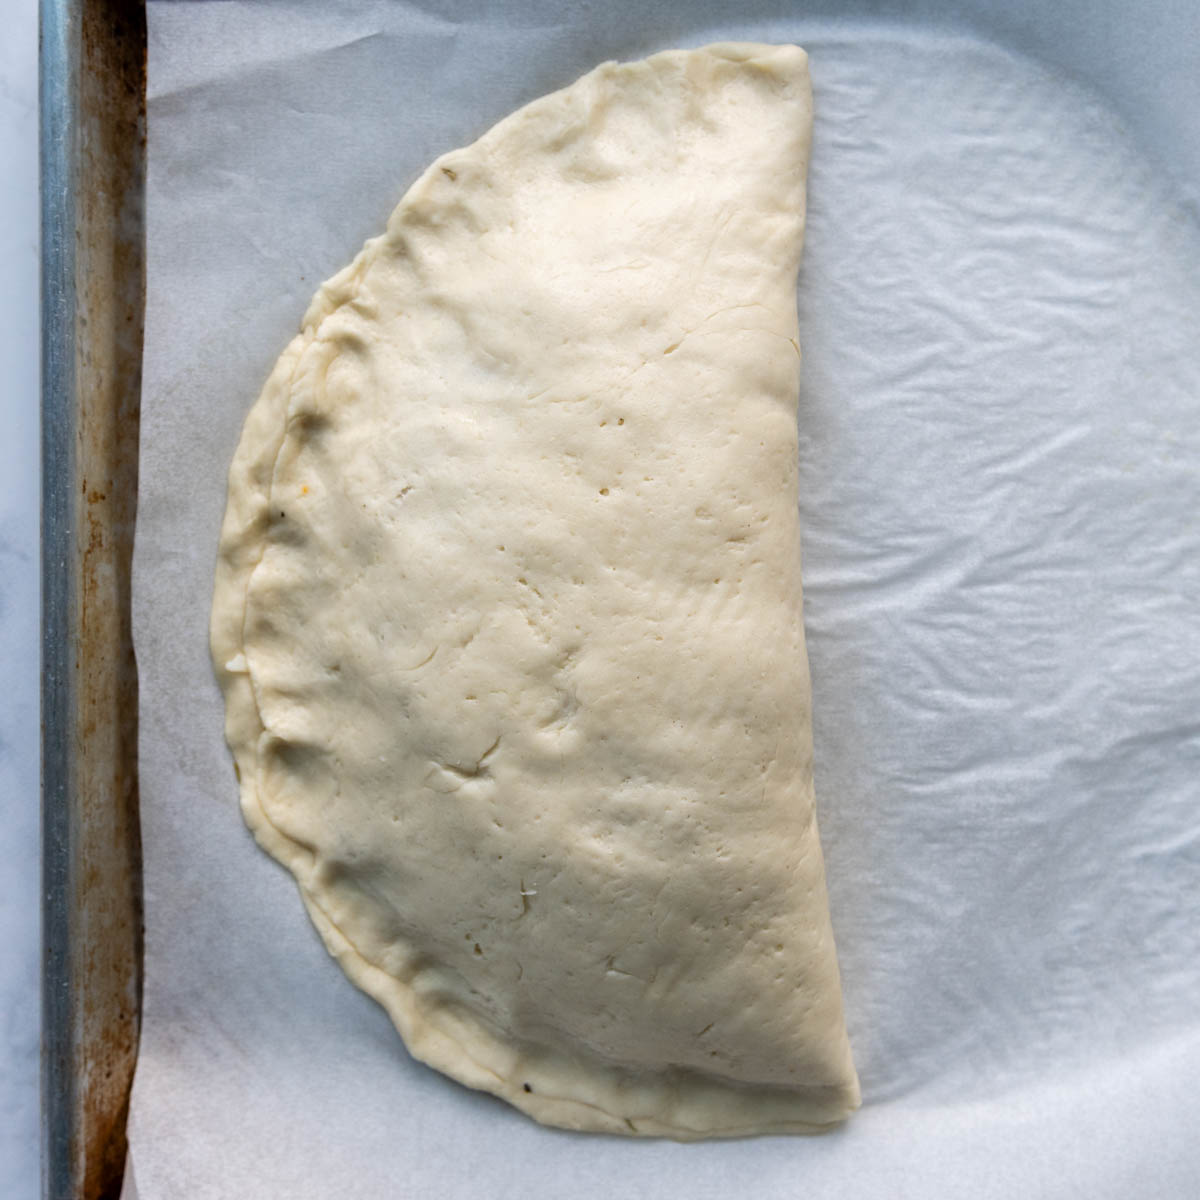 the calzone edges being shaped.